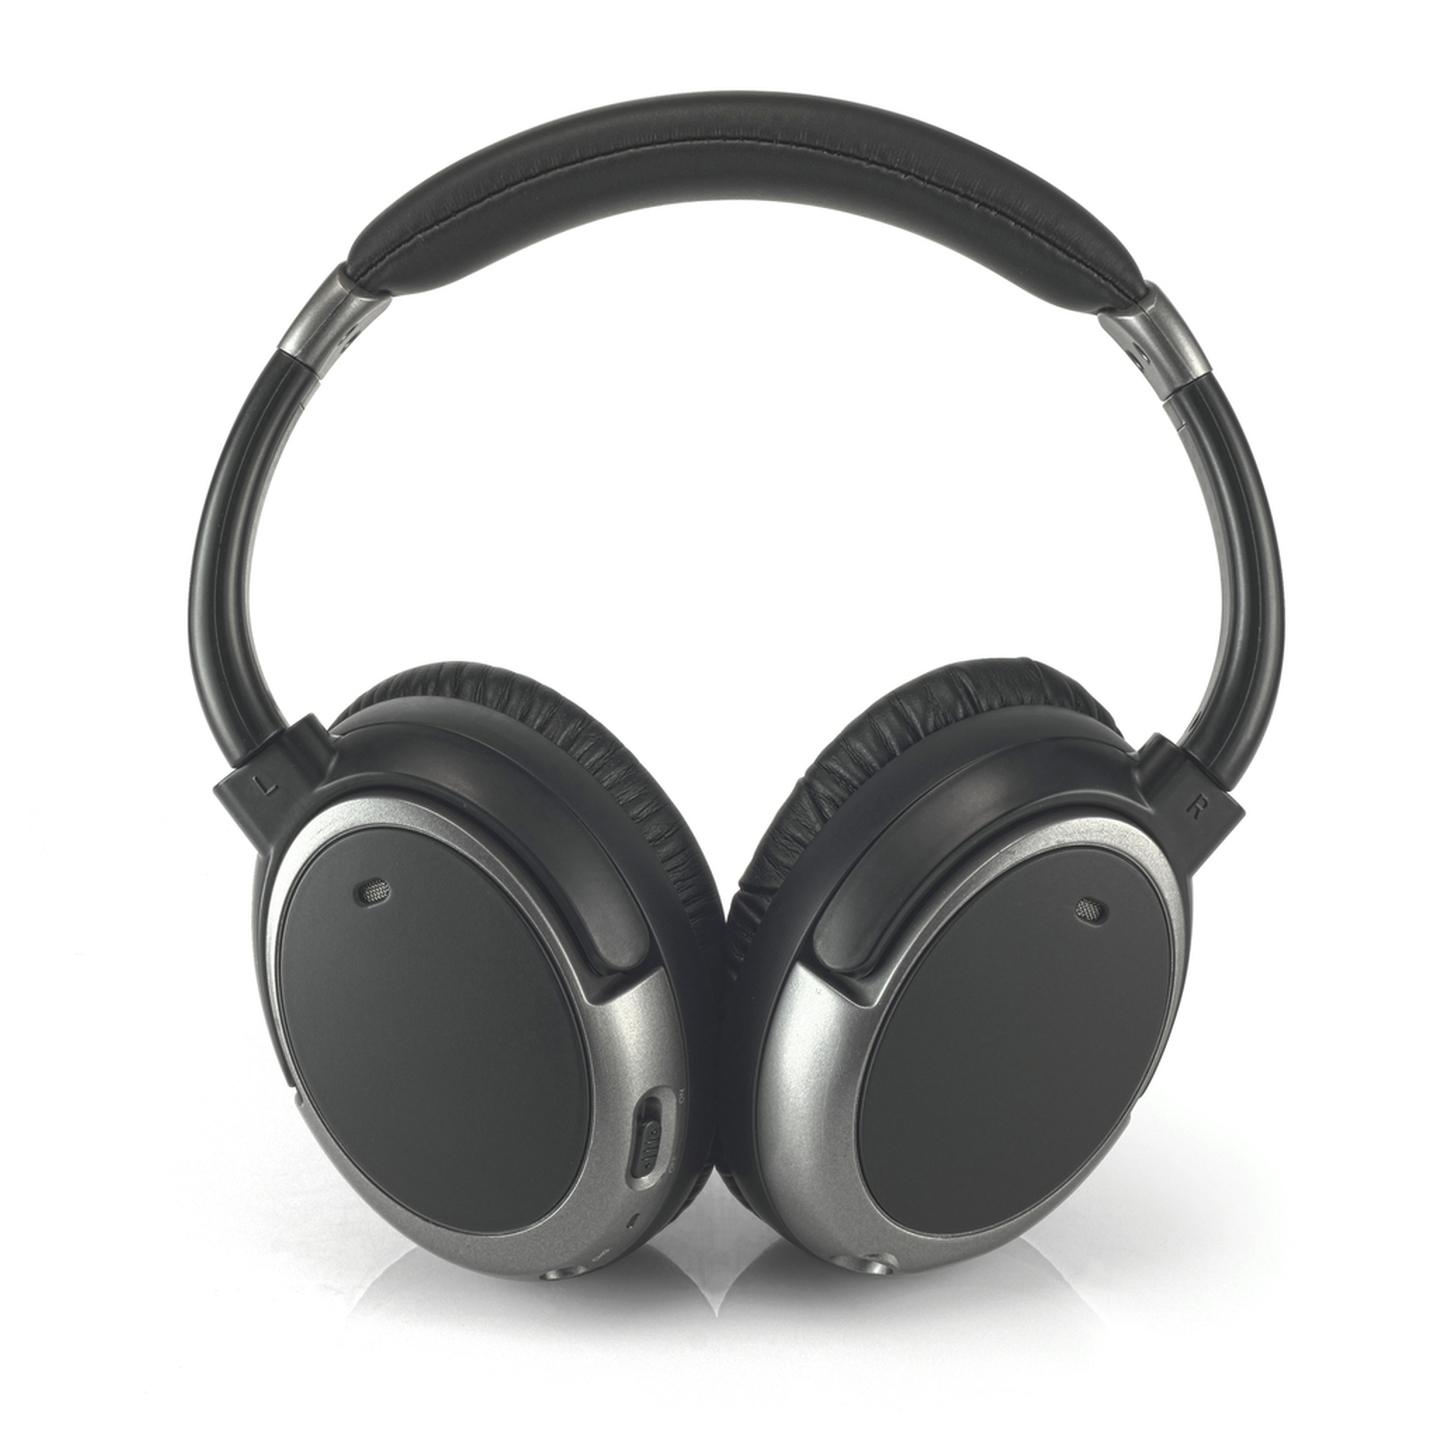 Active Noise Cancellation Headphones with Built-in USB Rechargeable Batteries